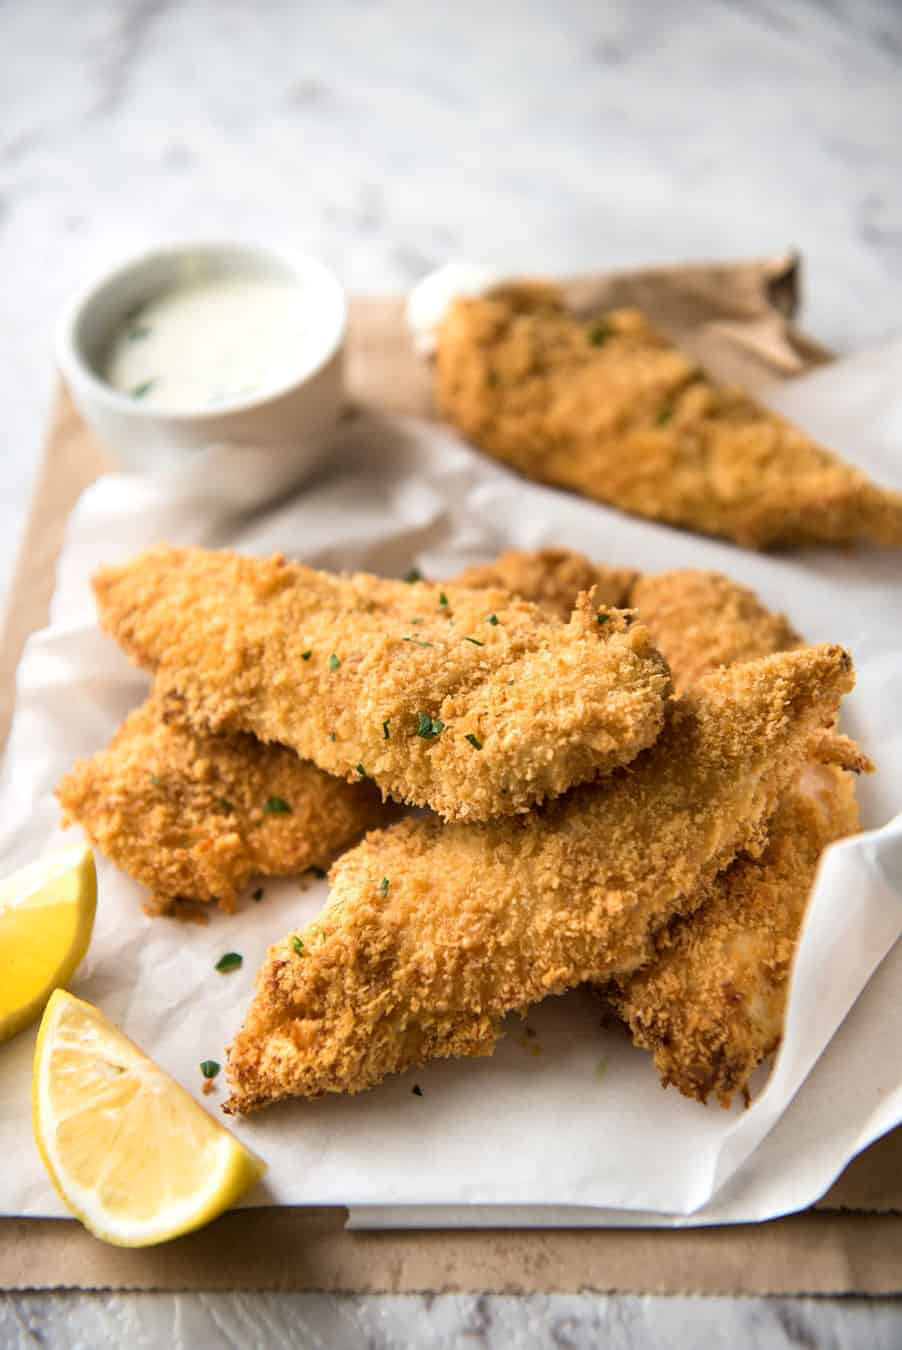 How To Make Chicken Tenders
 Oven Fried Parmesan Chicken Tenders